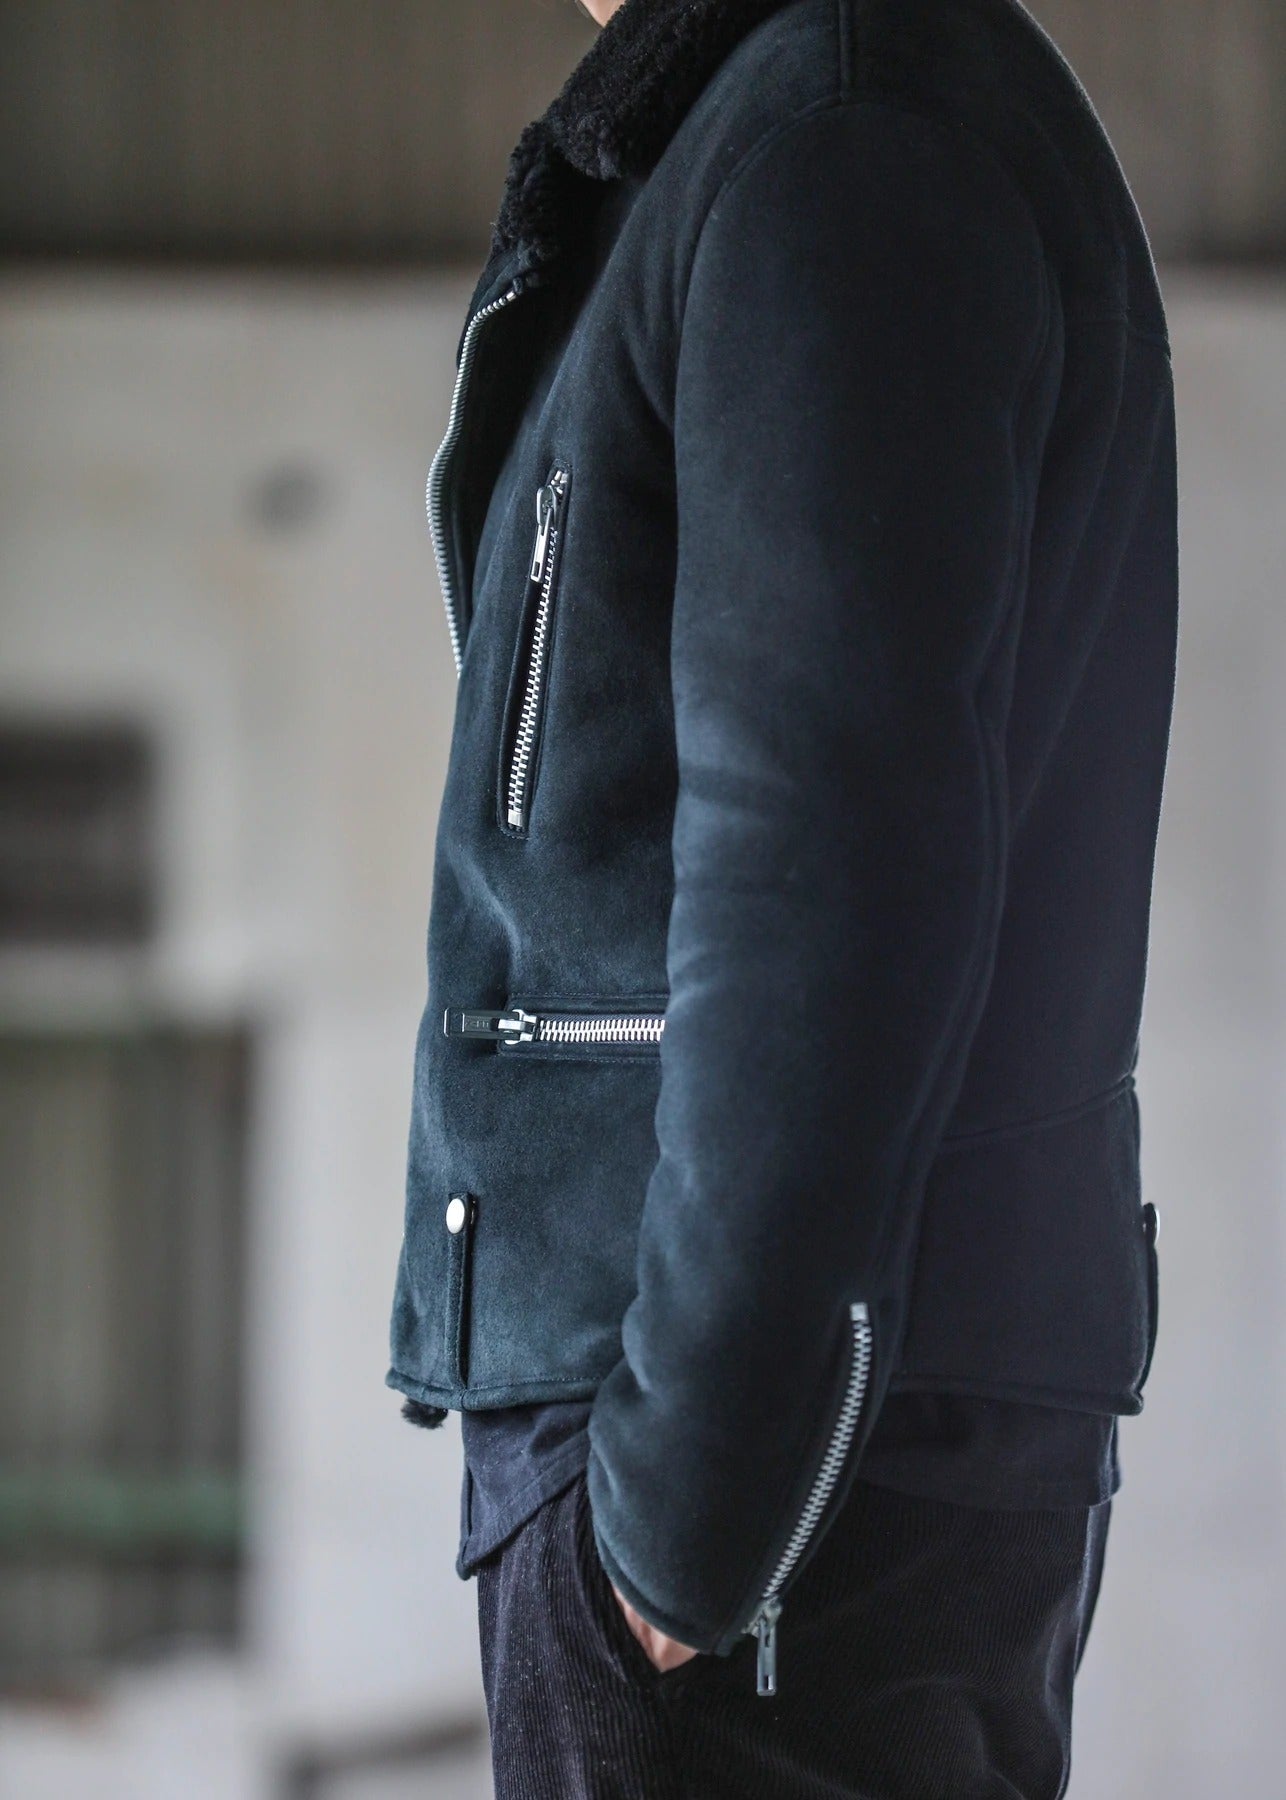 ACV-MT02 MOUTON DOUBLE RIDERS JACKET - May club